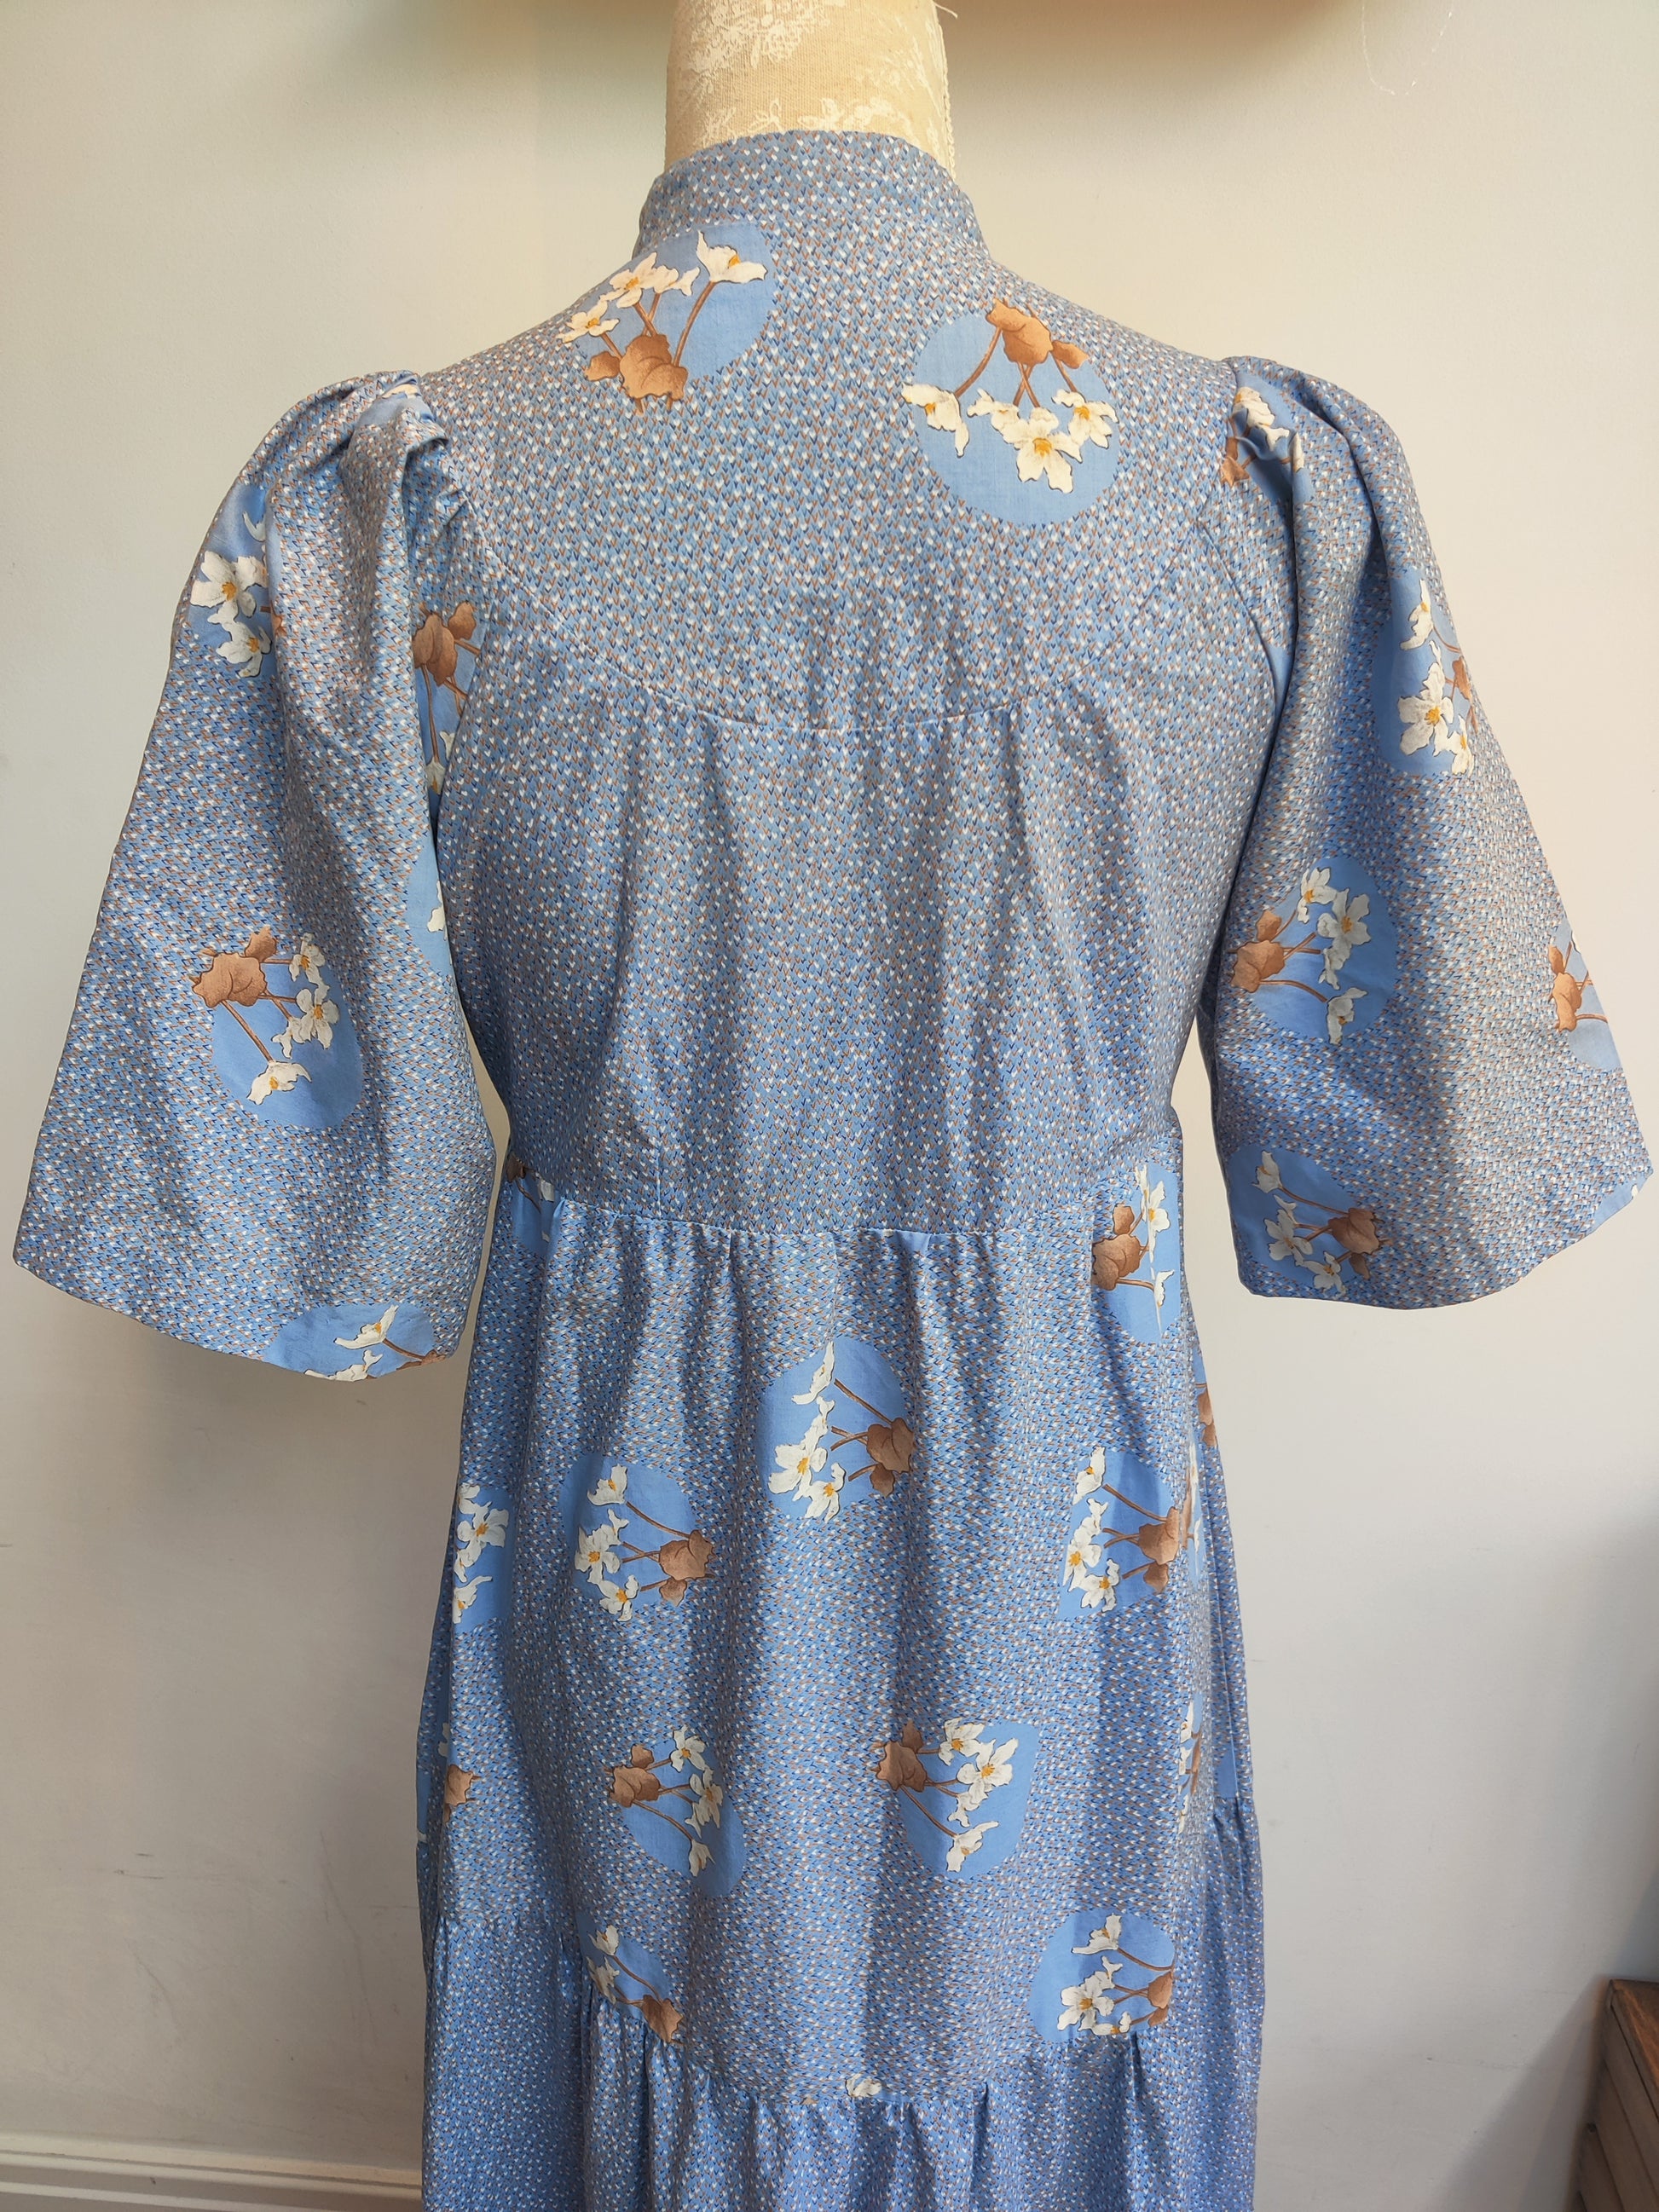 Blue floral 70s dress with short sleeves.